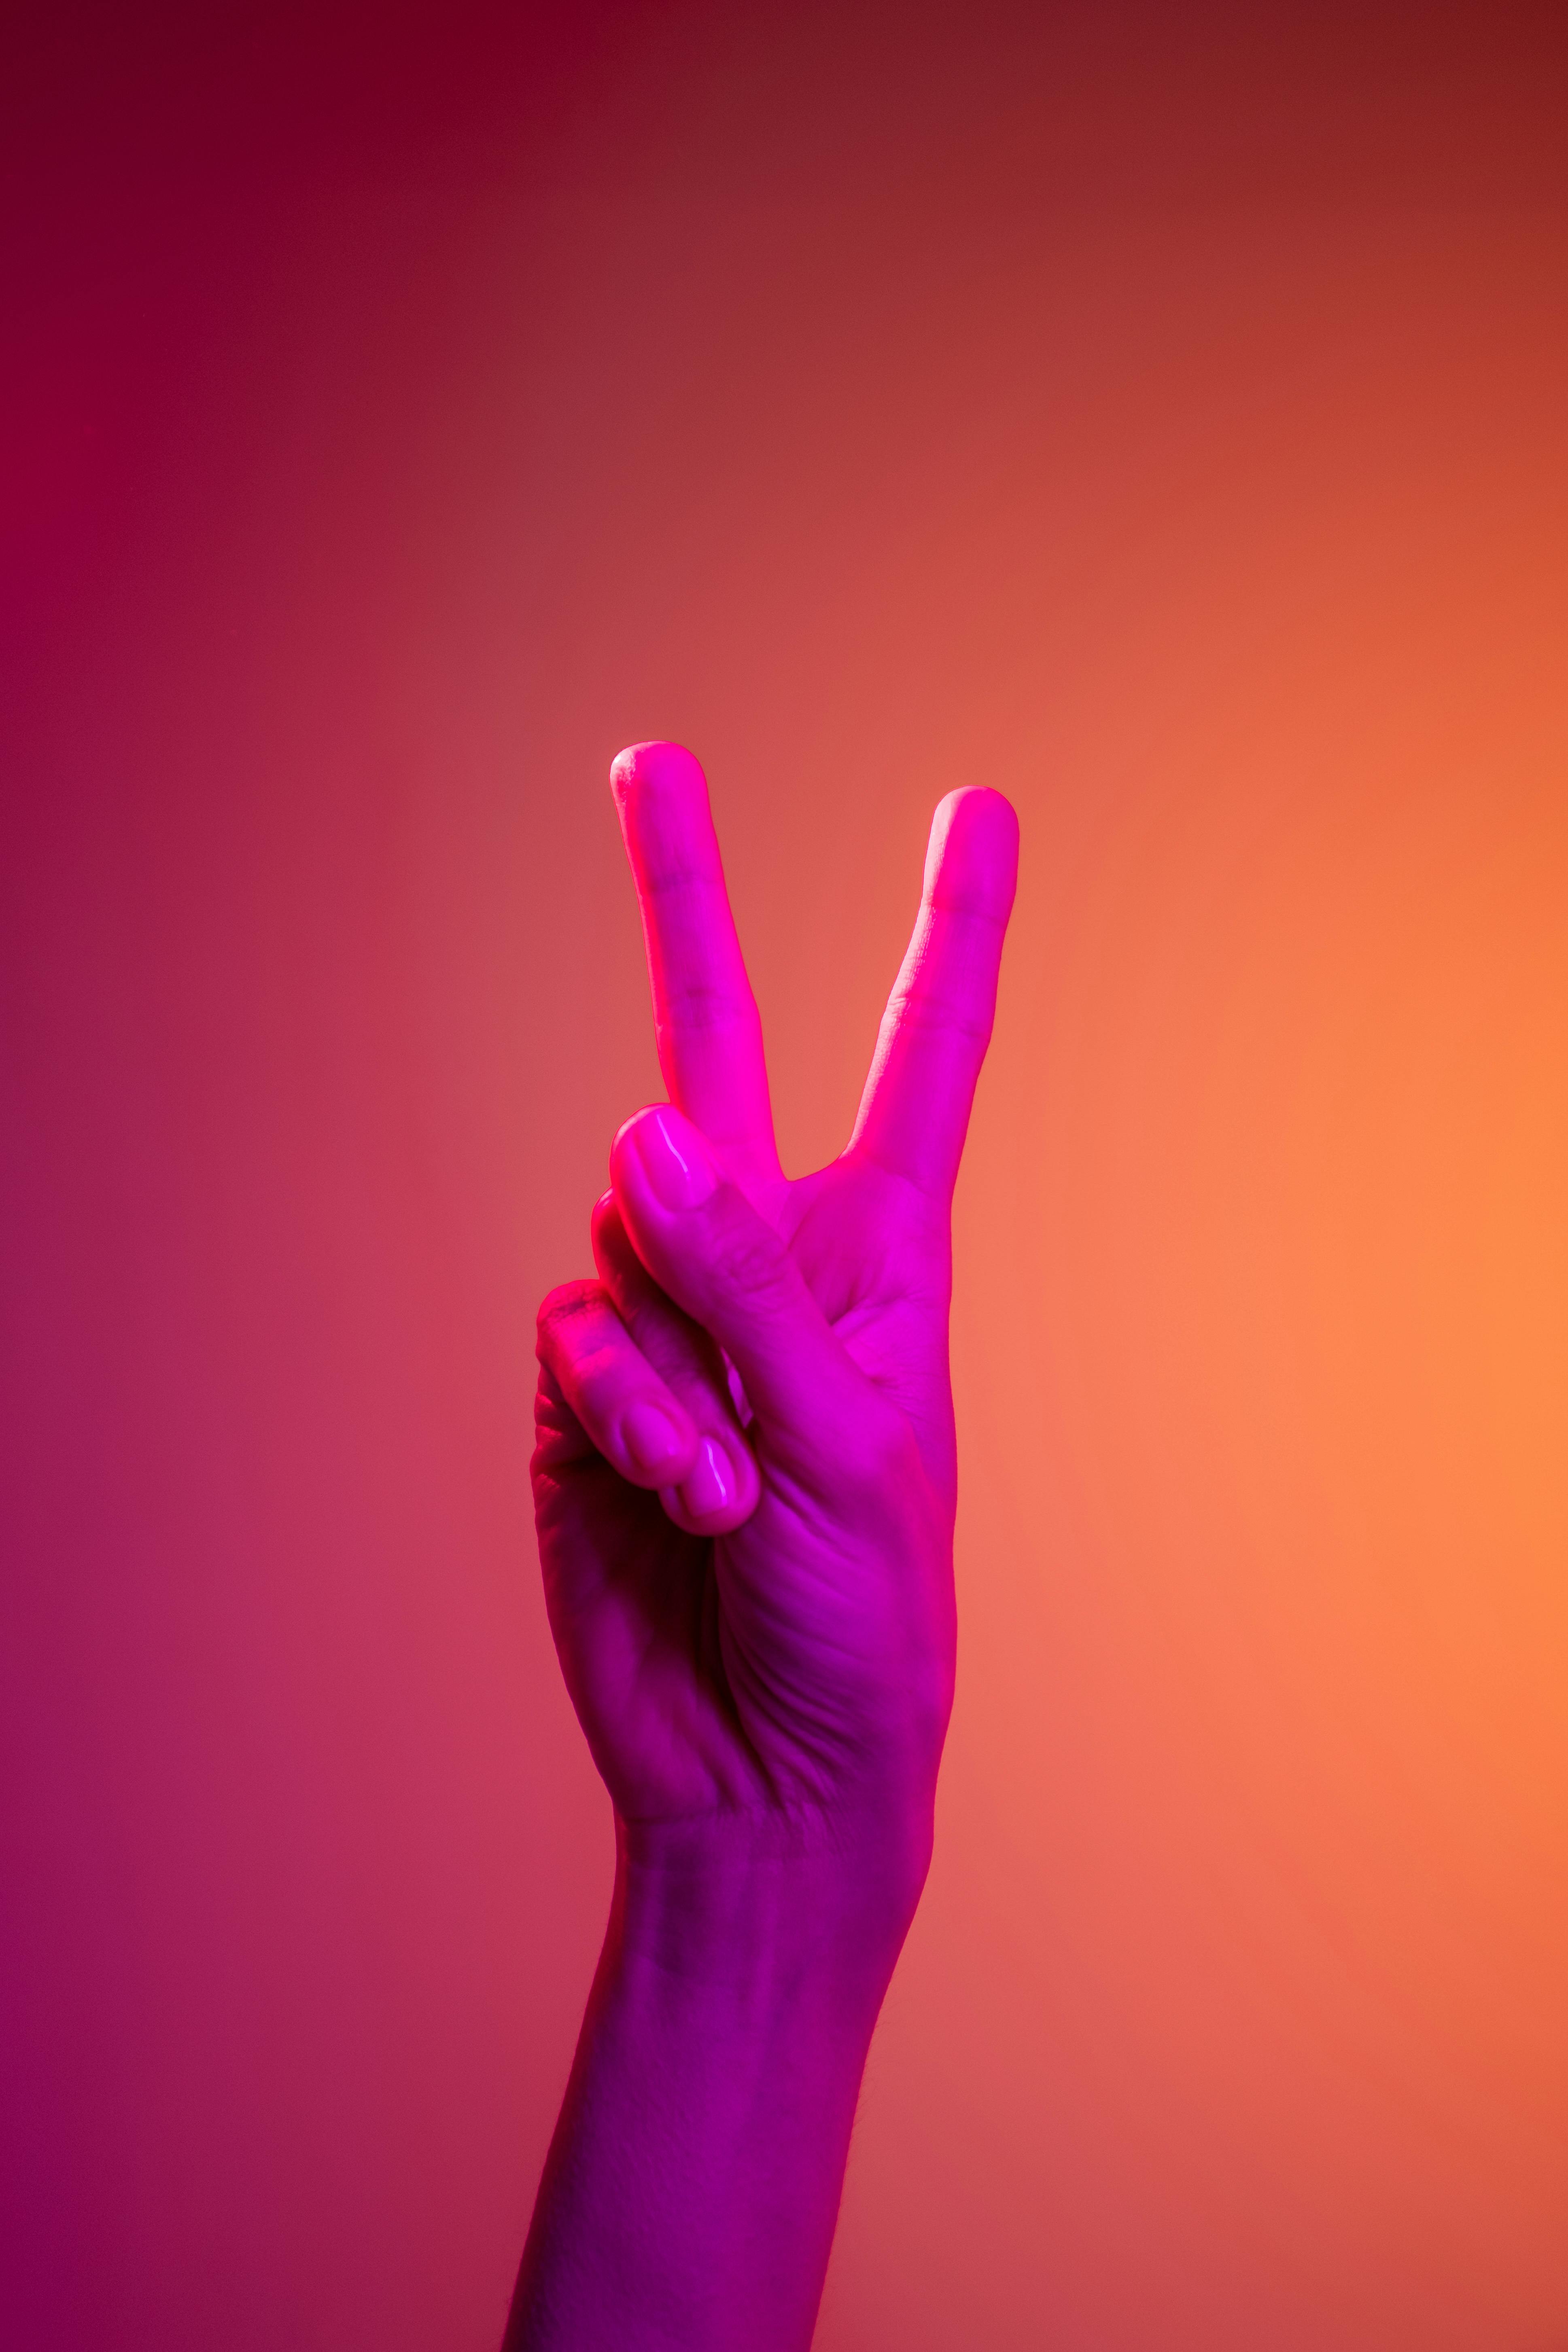 pink peace sign backgrounds